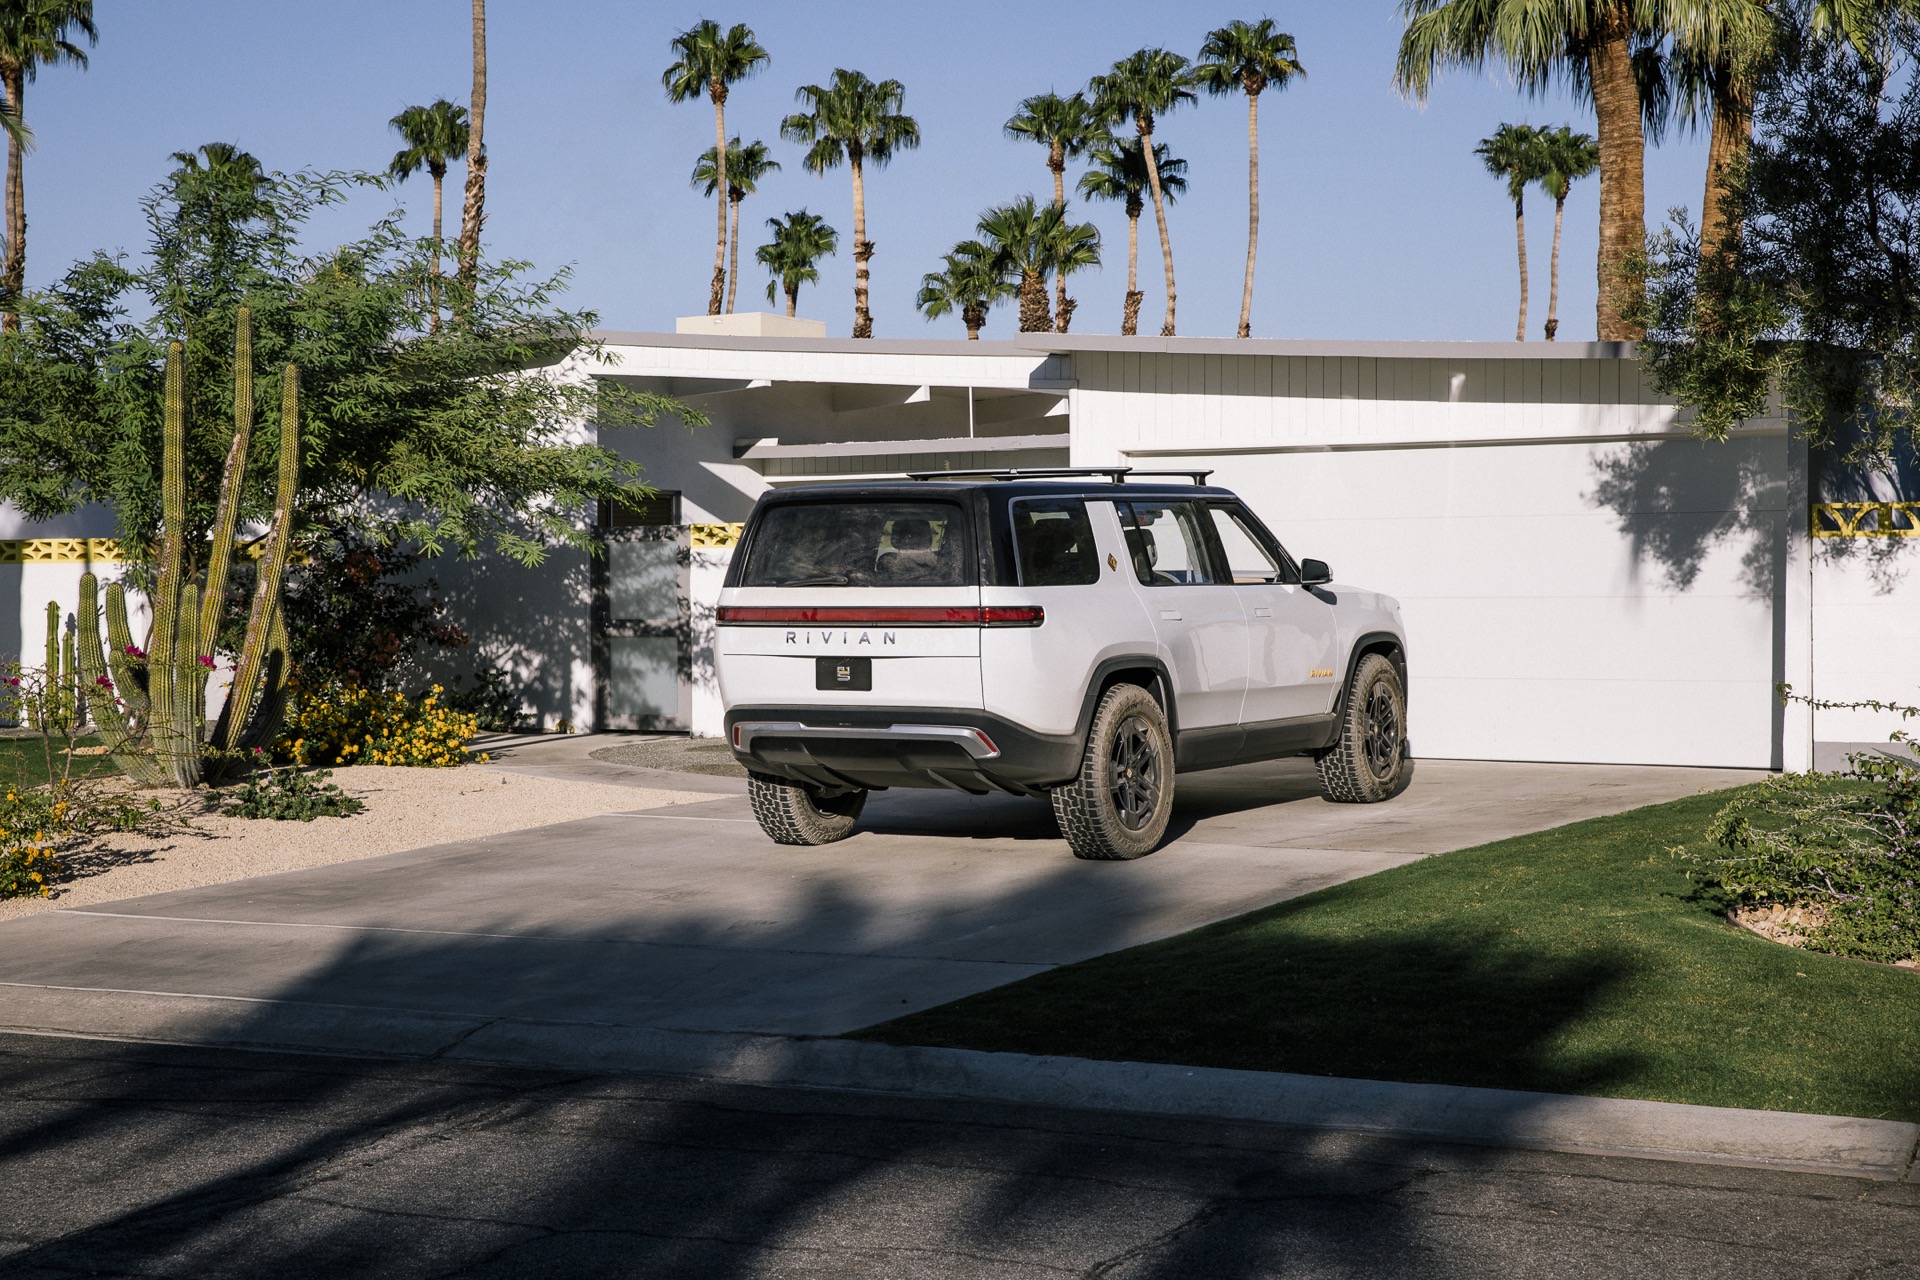 Rivian files for IPO, $80 billion target is 350 times Tesla's IPO valuationRivian files for IPO, $80 billion target is 350 times Tesla's IPO valuation